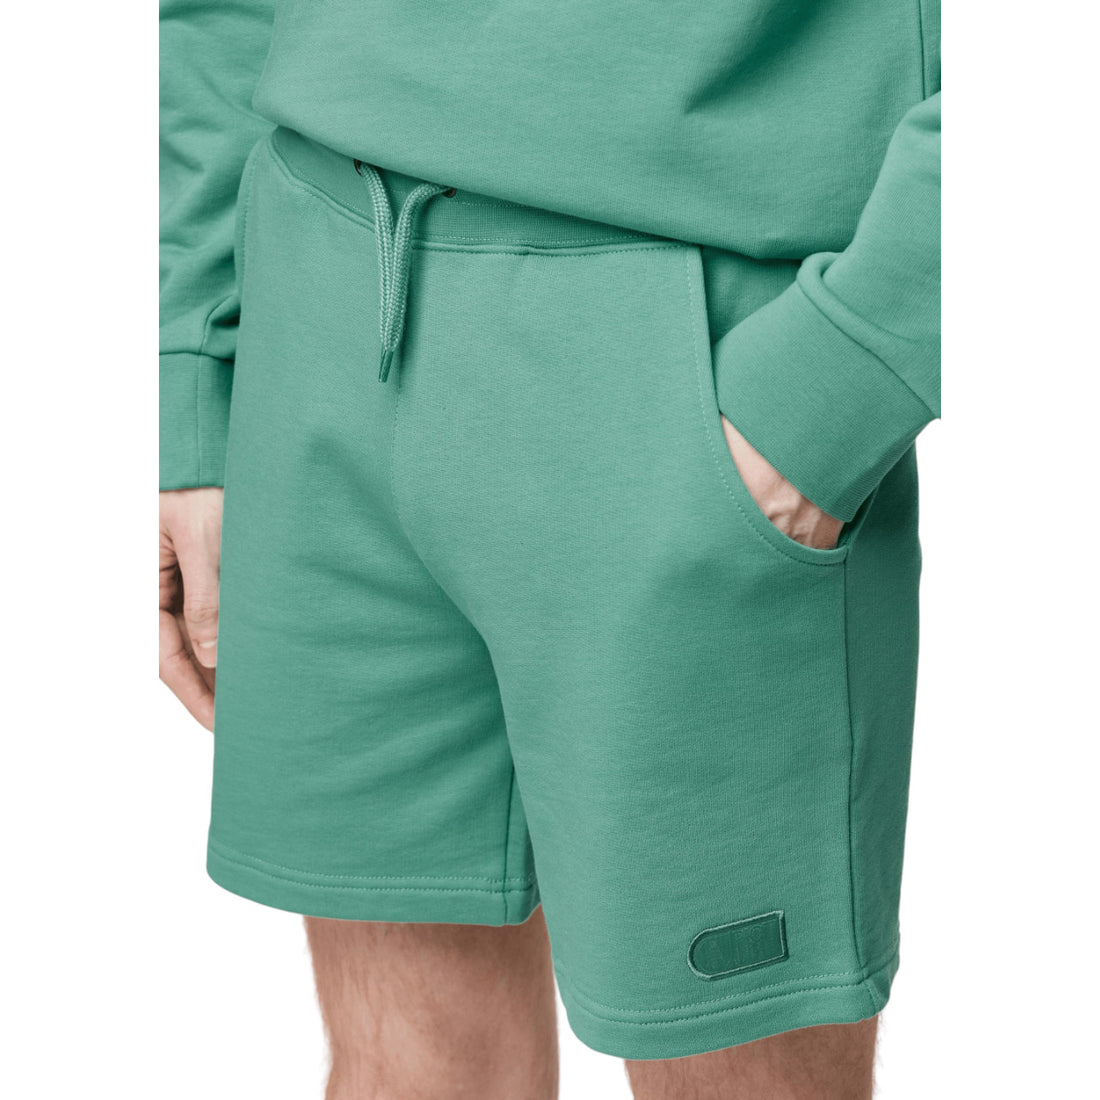 Picture Organic Clothing Augusto Shorts